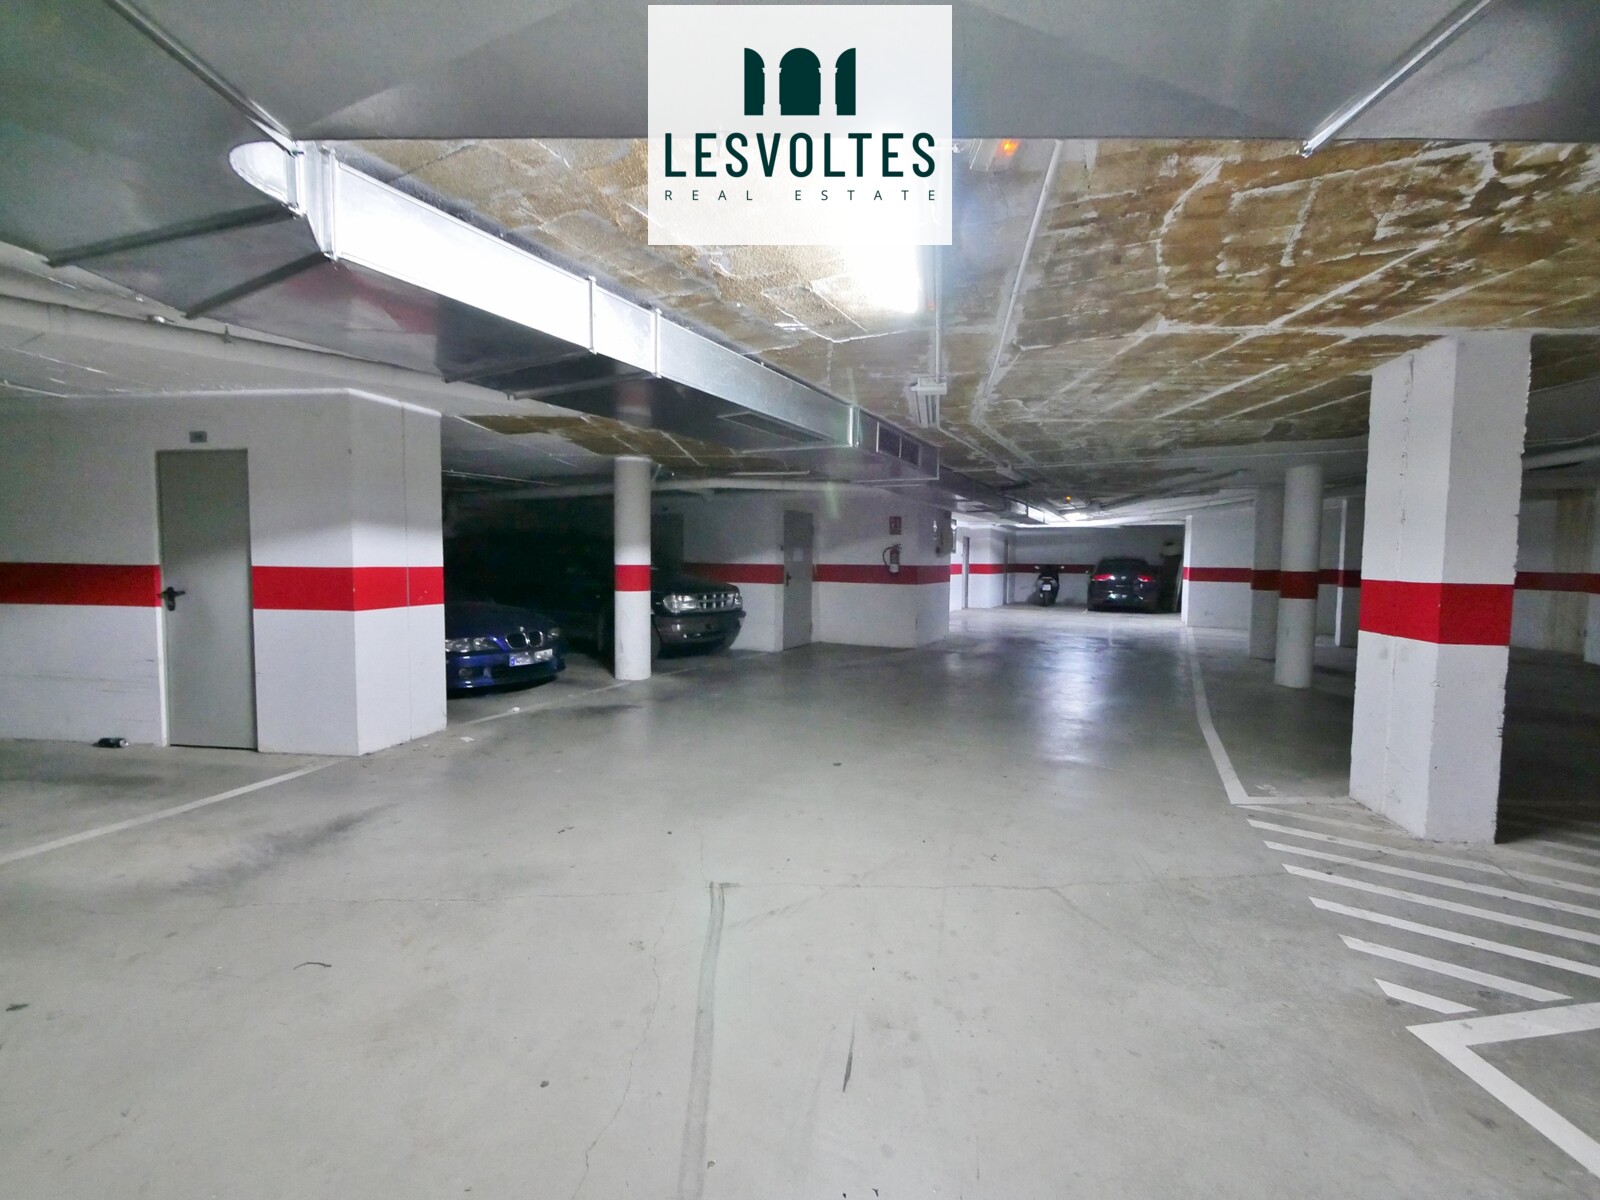 PARKING SPACES AND STORAGE ROOM FOR SALE IN FORALLAC.